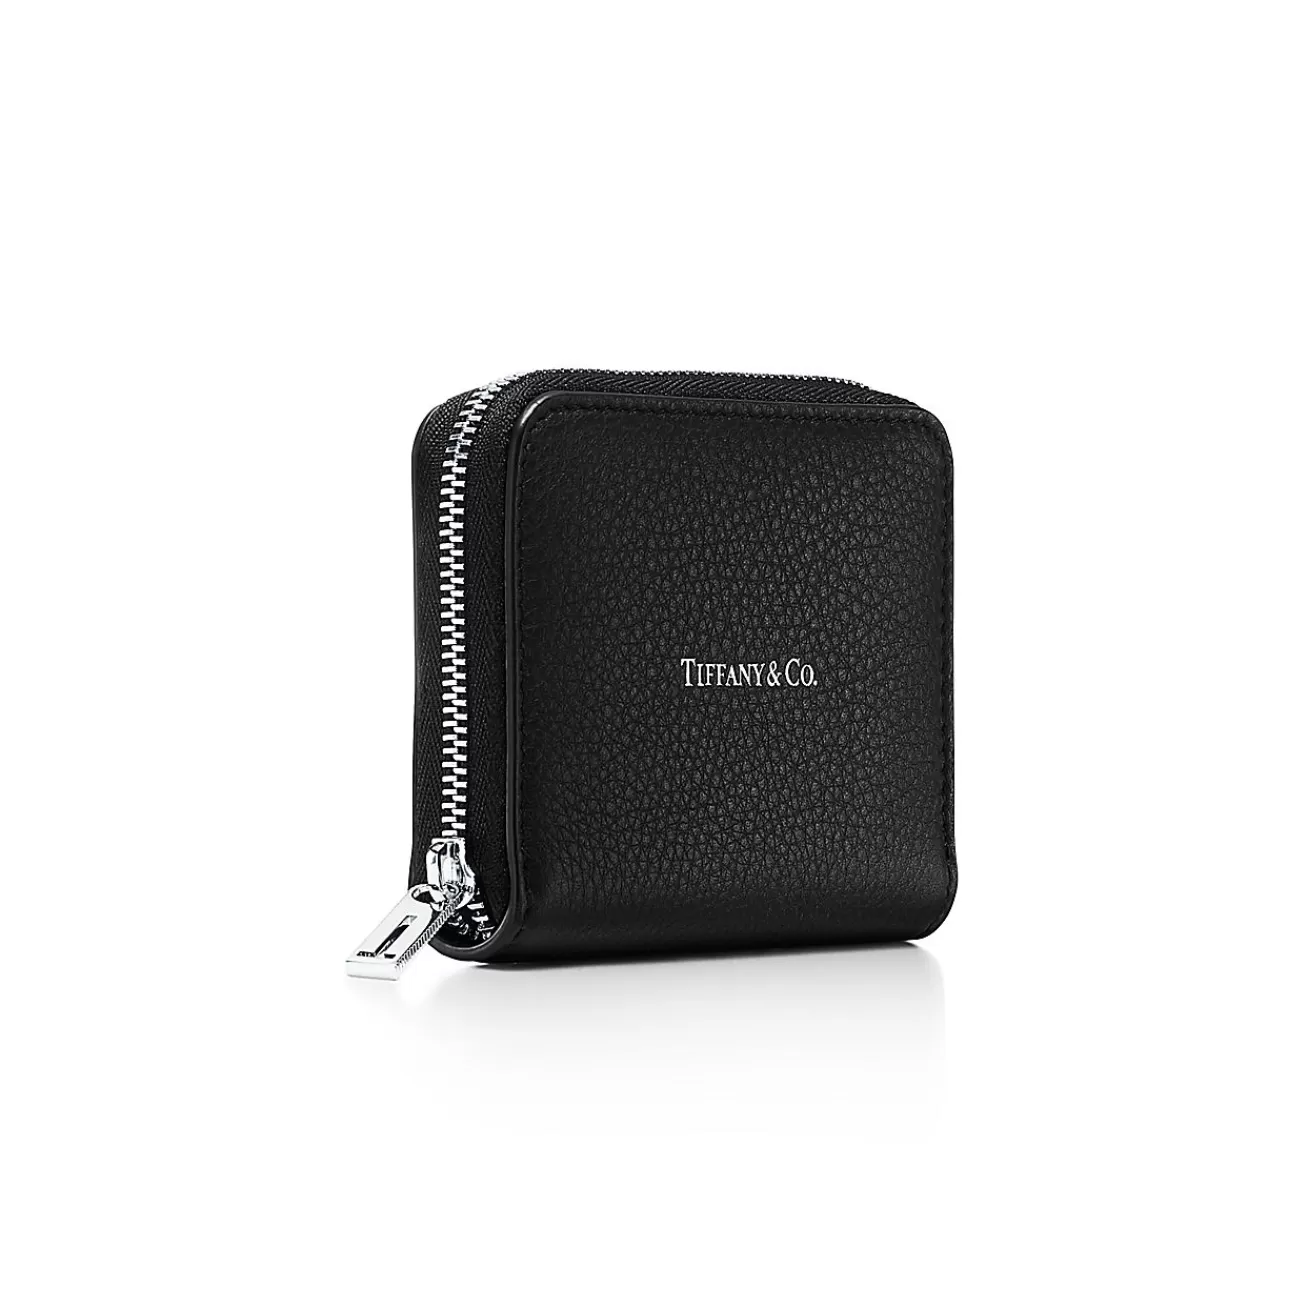 Tiffany & Co. Zip Coin Pouch in Black Leather | ^ Small Leather Goods | Women's Accessories